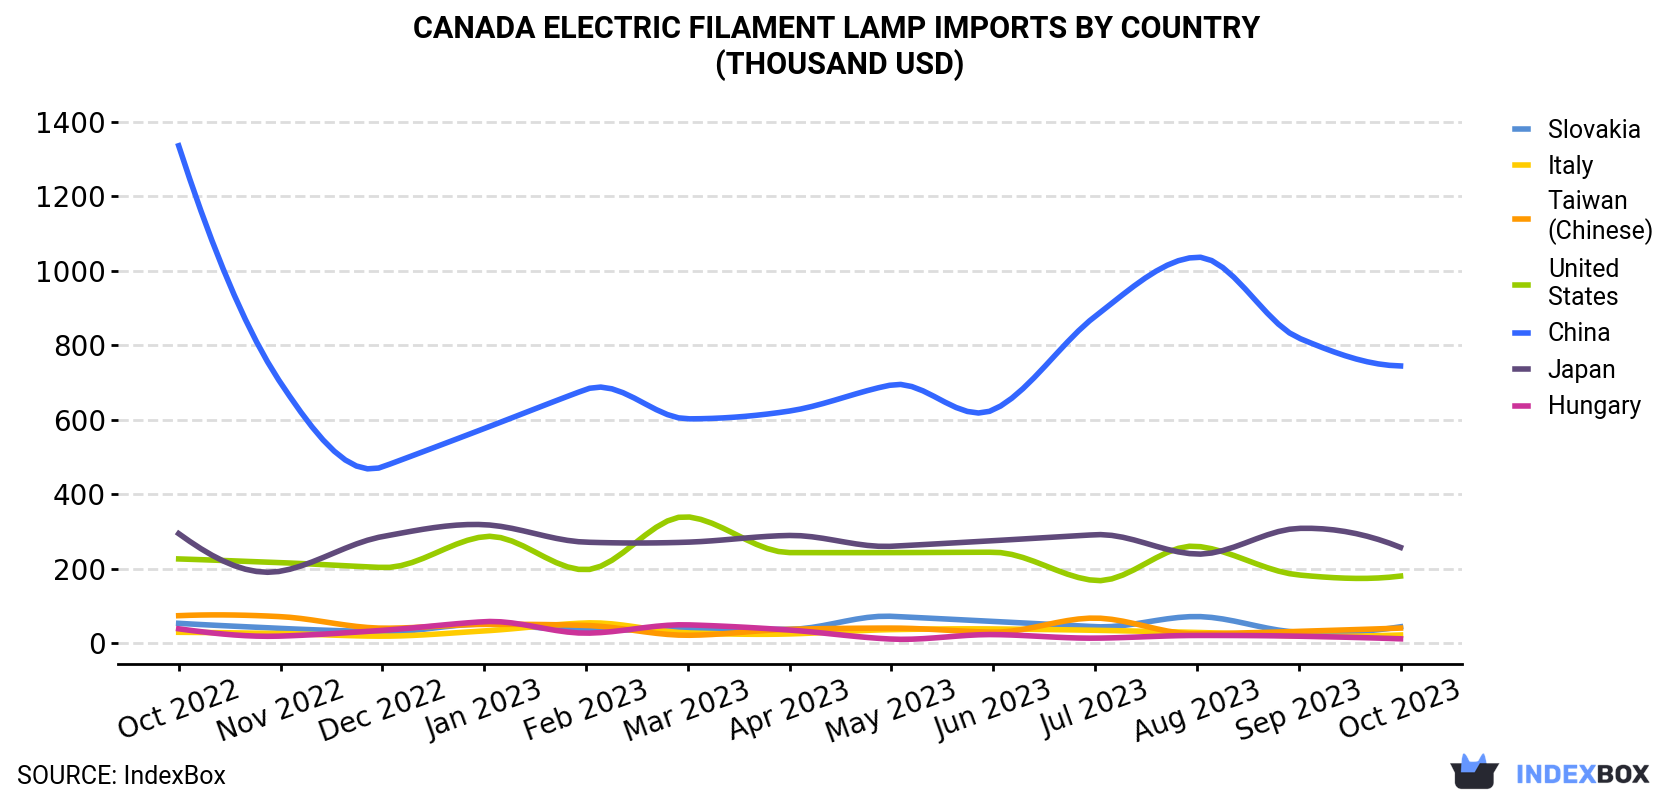 Canada Electric Filament Lamp Imports By Country (Thousand USD)